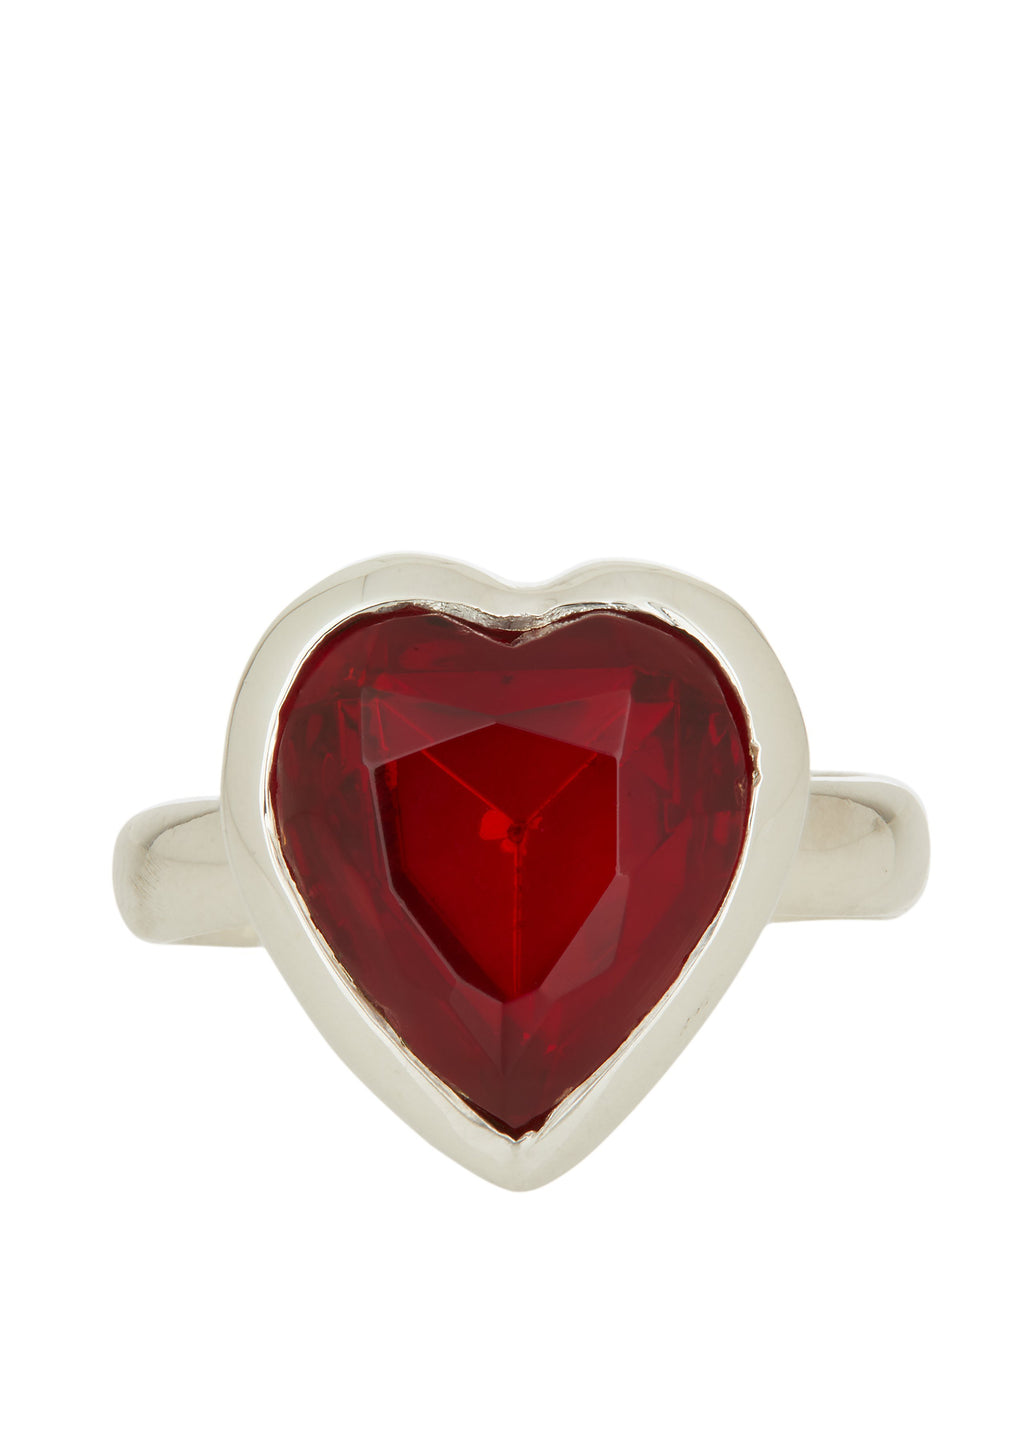 Lovely Ring in Sterling Silver - Ruby